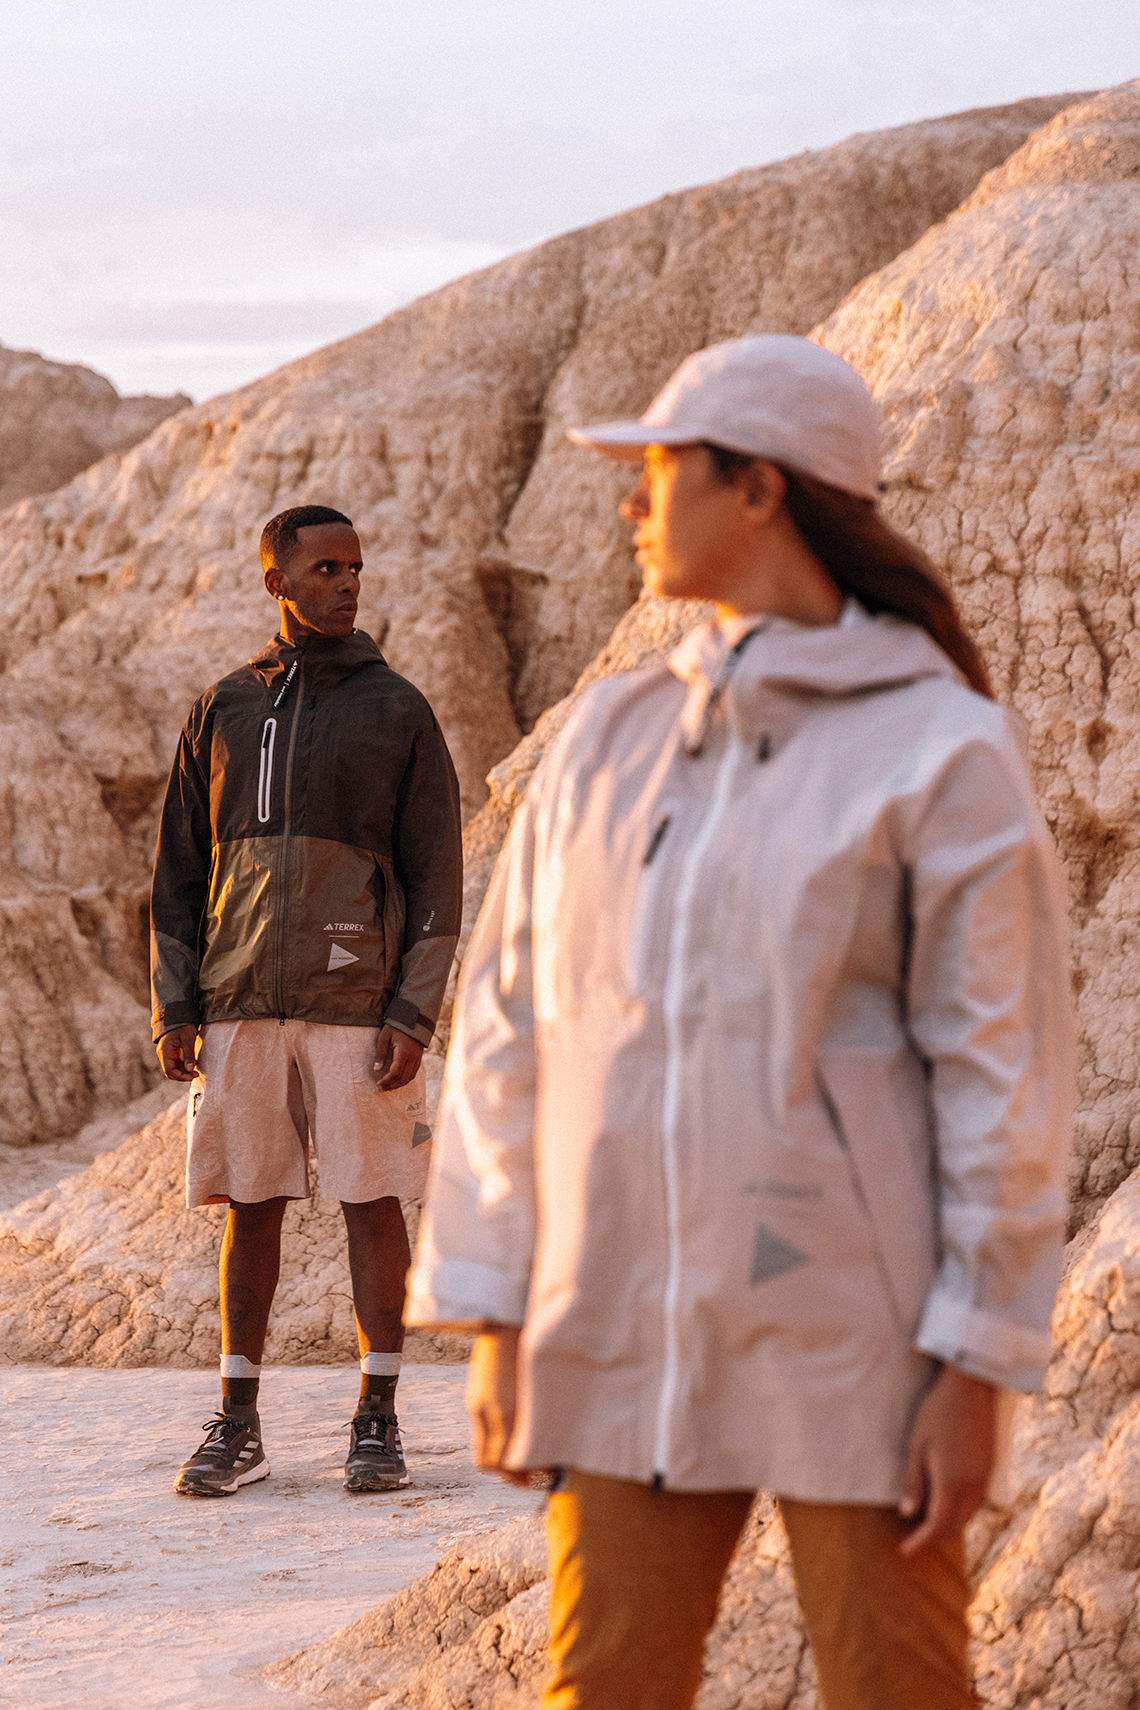 Adidas Terrex Unveils Final Release in Three-Drop Collab with And